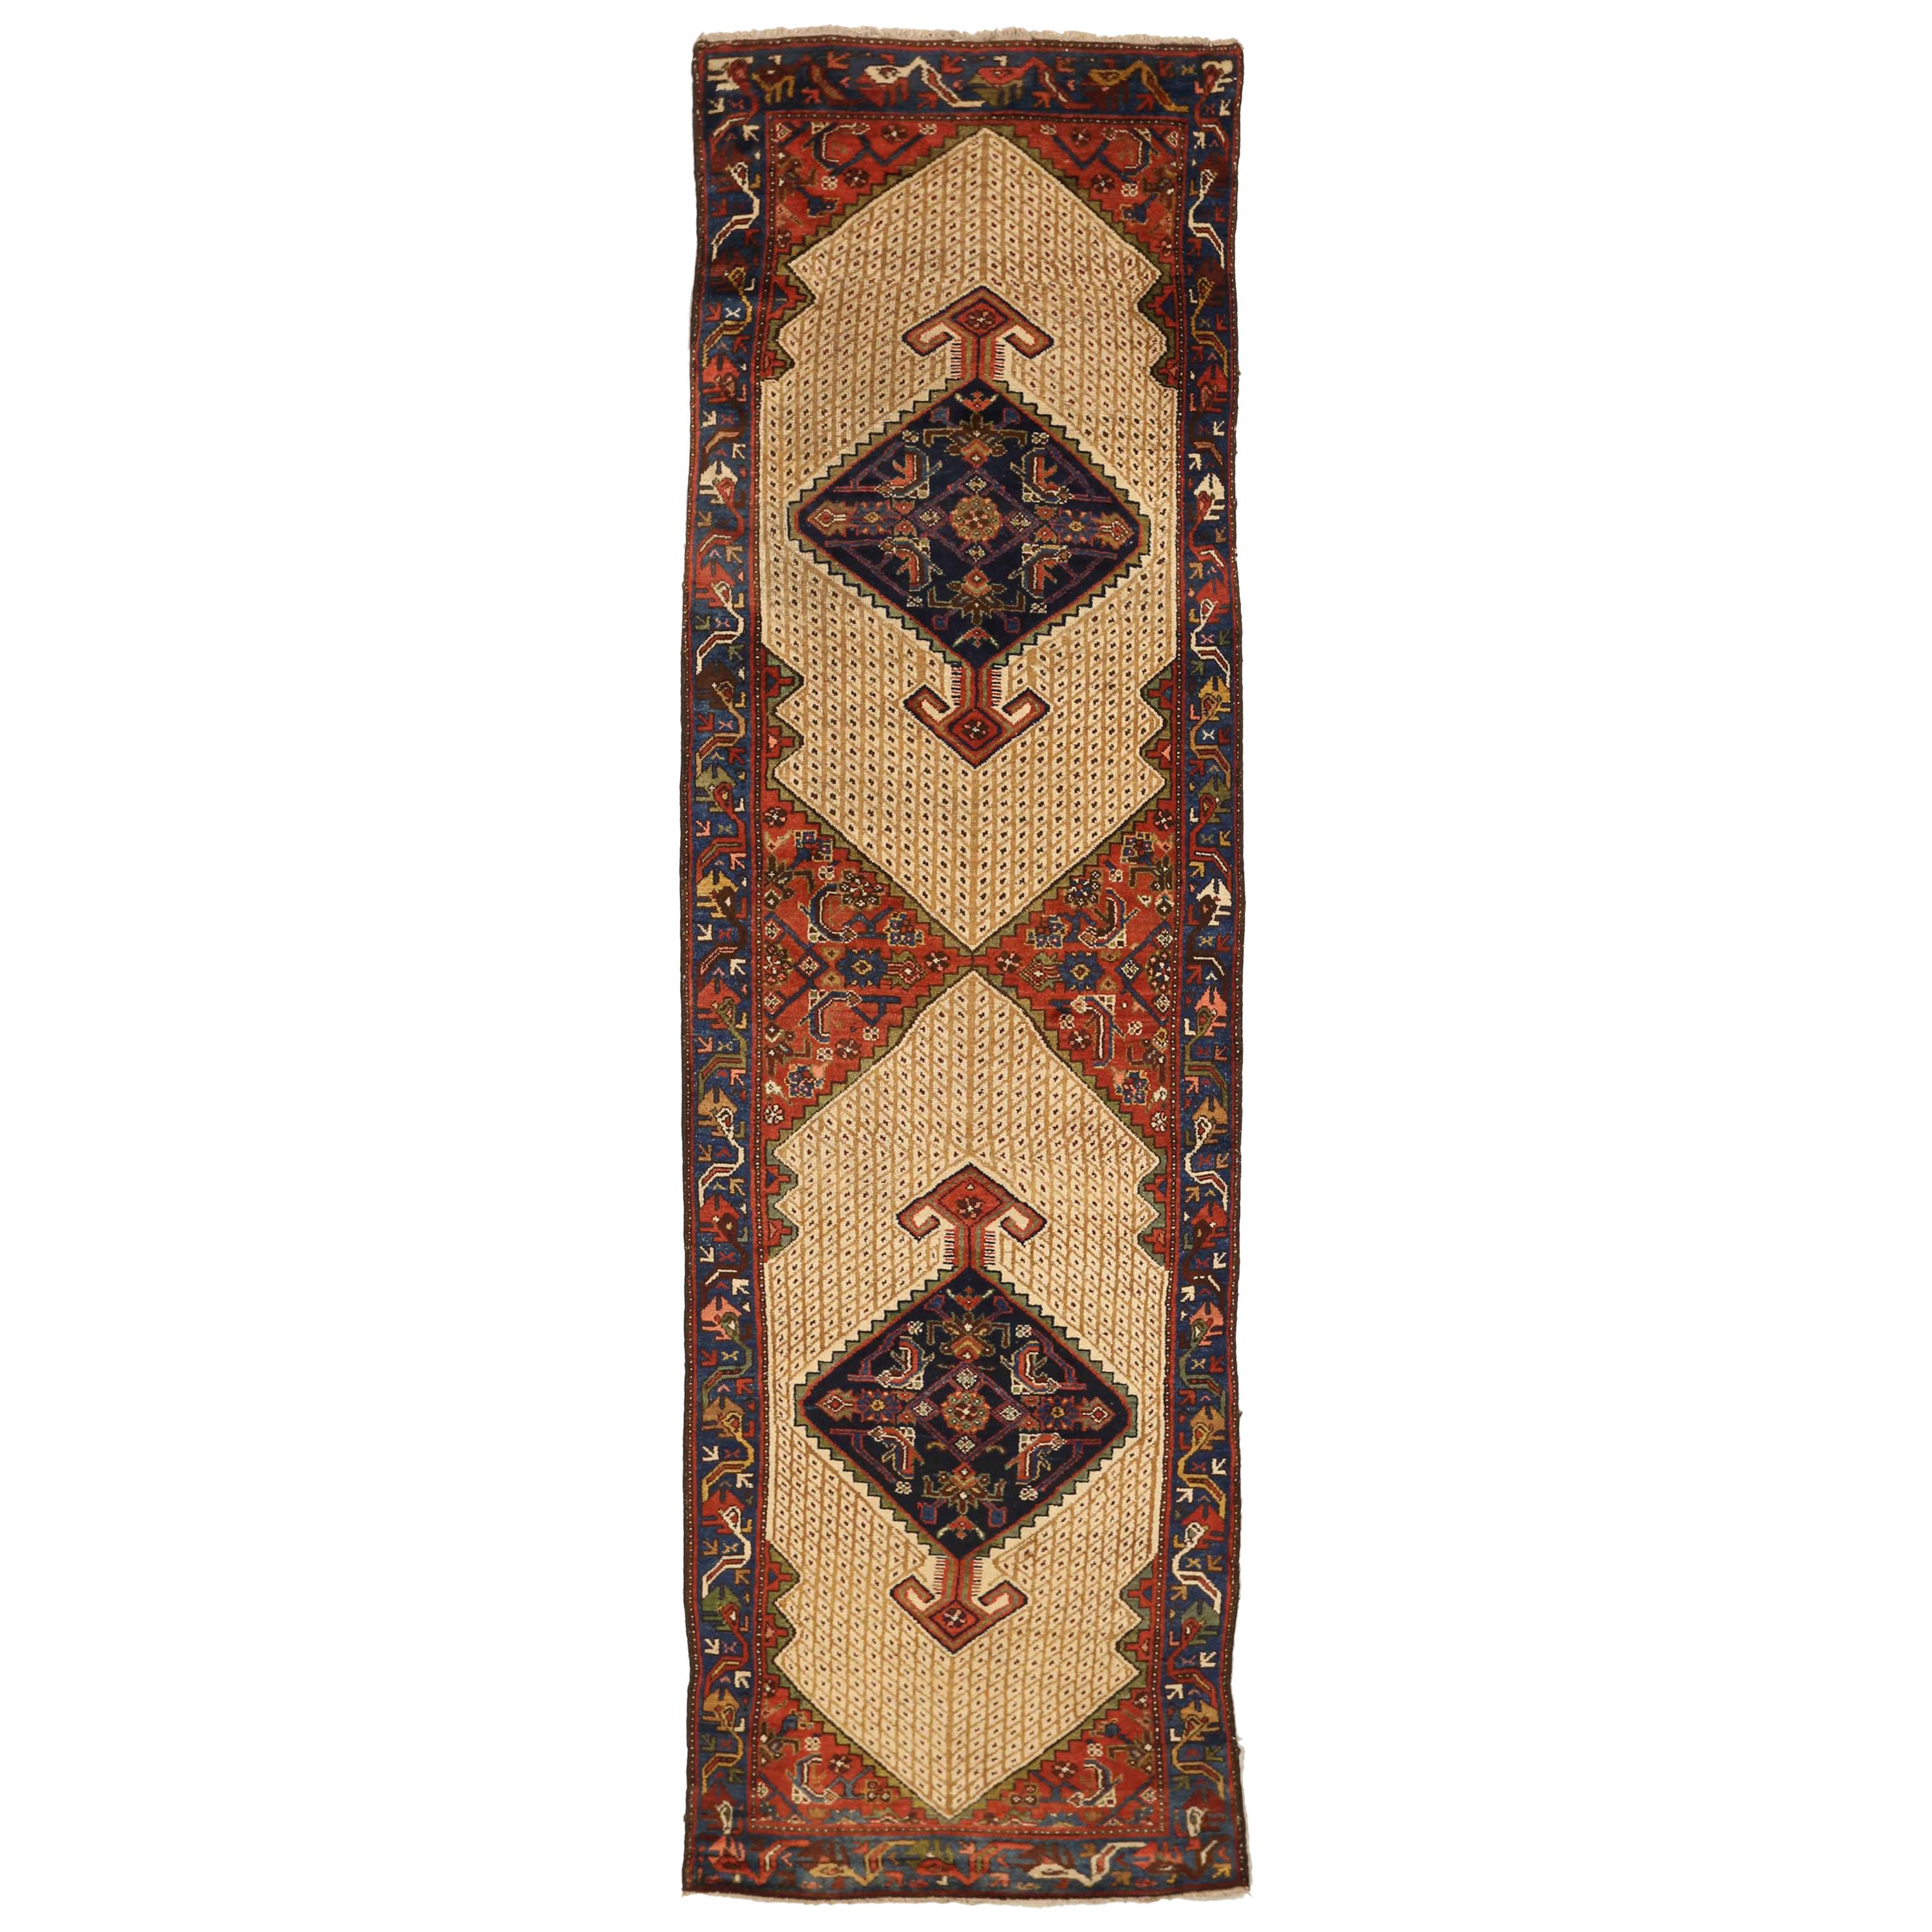 Antique Persian Rug Malayer Design with Fine Tribal Details, circa 1920s